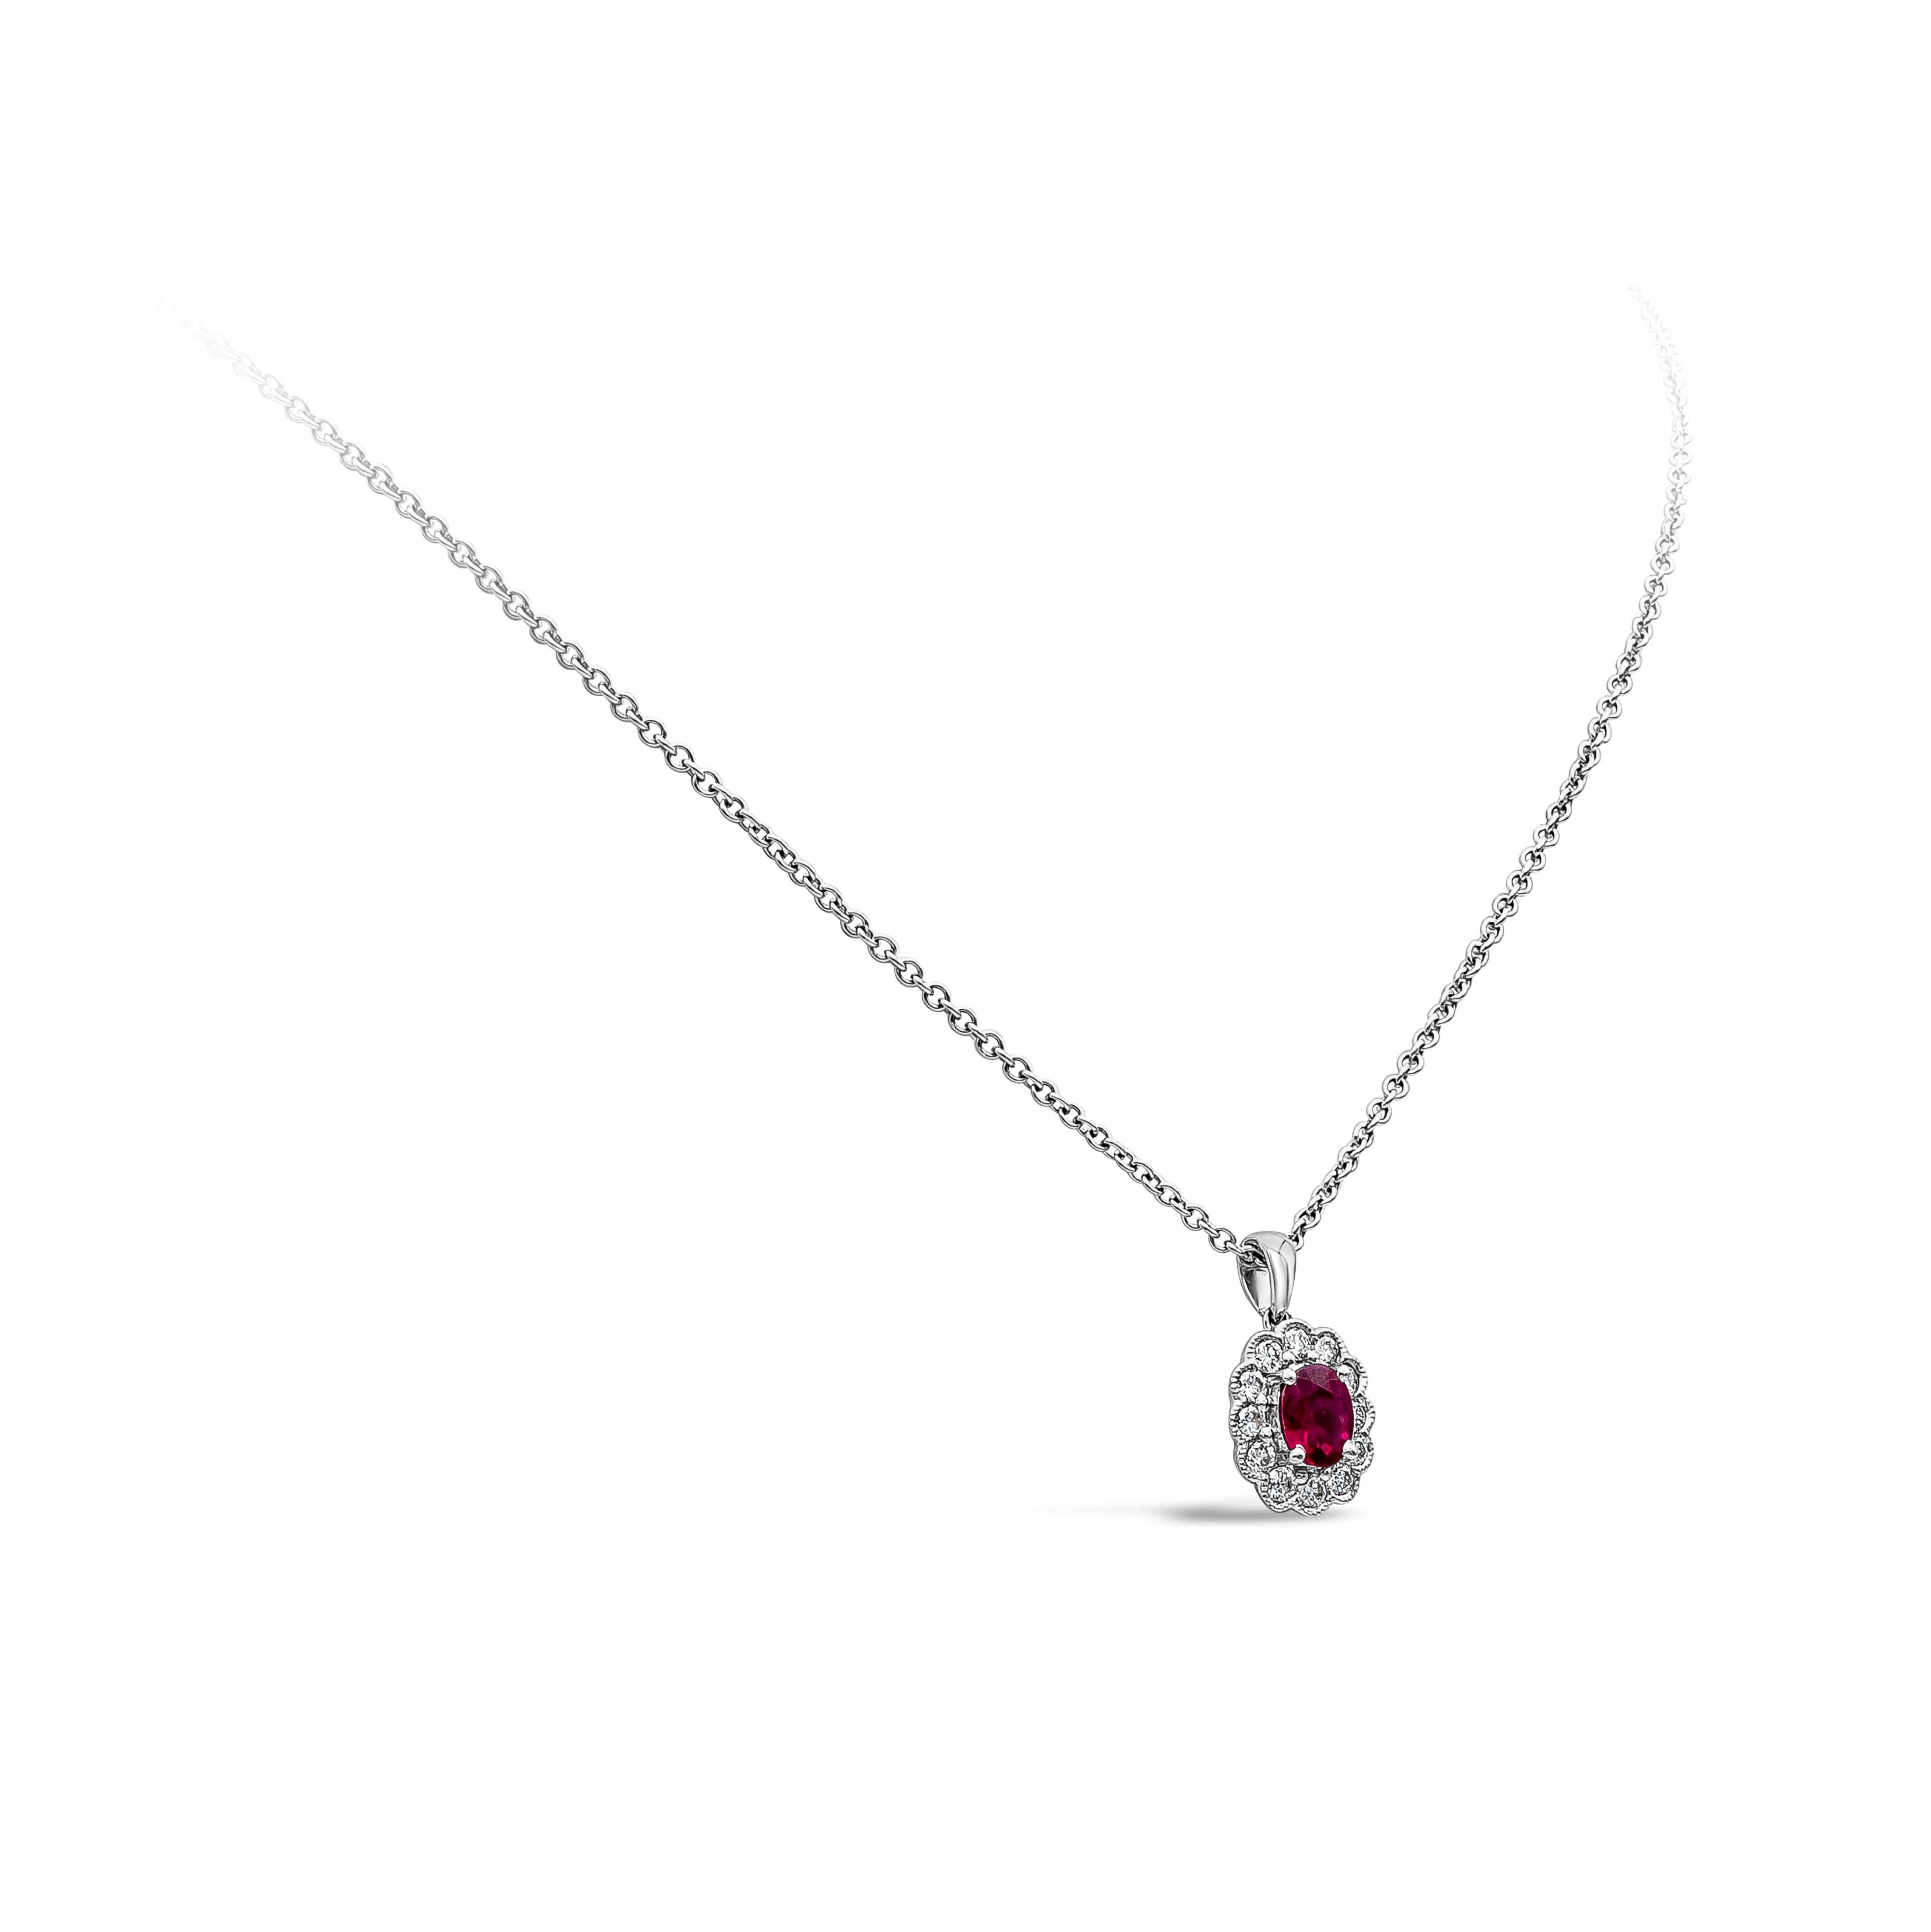 A simple classic piece of jewelry showcases an oval cut red ruby weighing 0.65 carats total, surrounded by round brilliant diamonds, set in a milgrain-edged bezel creating a floral motif mounted in 18k white gold basket. Accent diamonds weigh 0.36